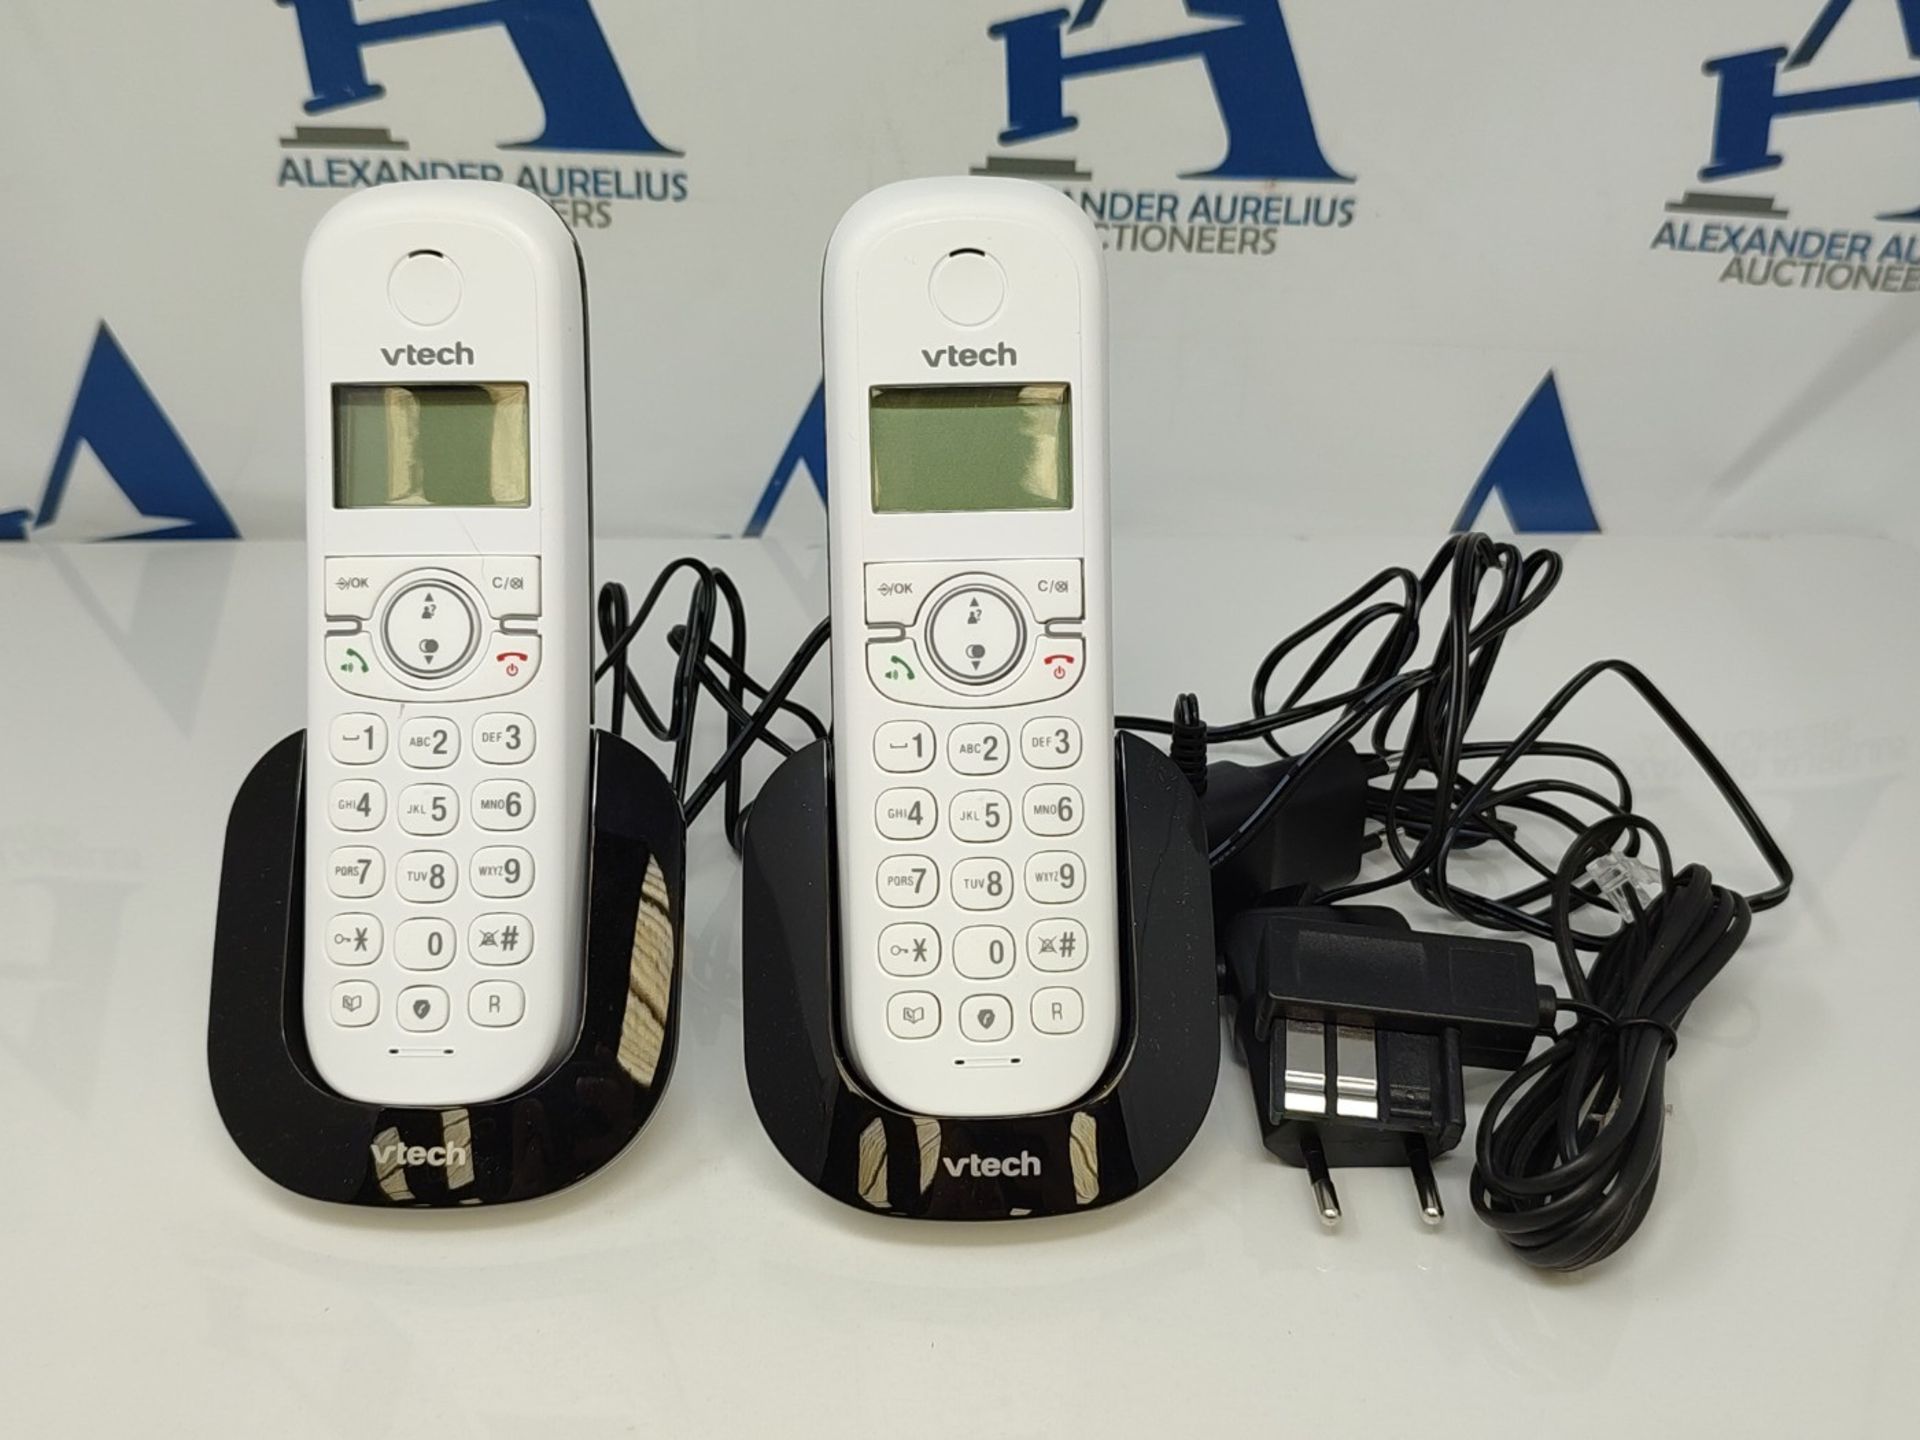 VTech CS1501 DECT Cordless Phone with Two Handsets, Call Blocking, Caller ID/Call Wait - Image 3 of 3